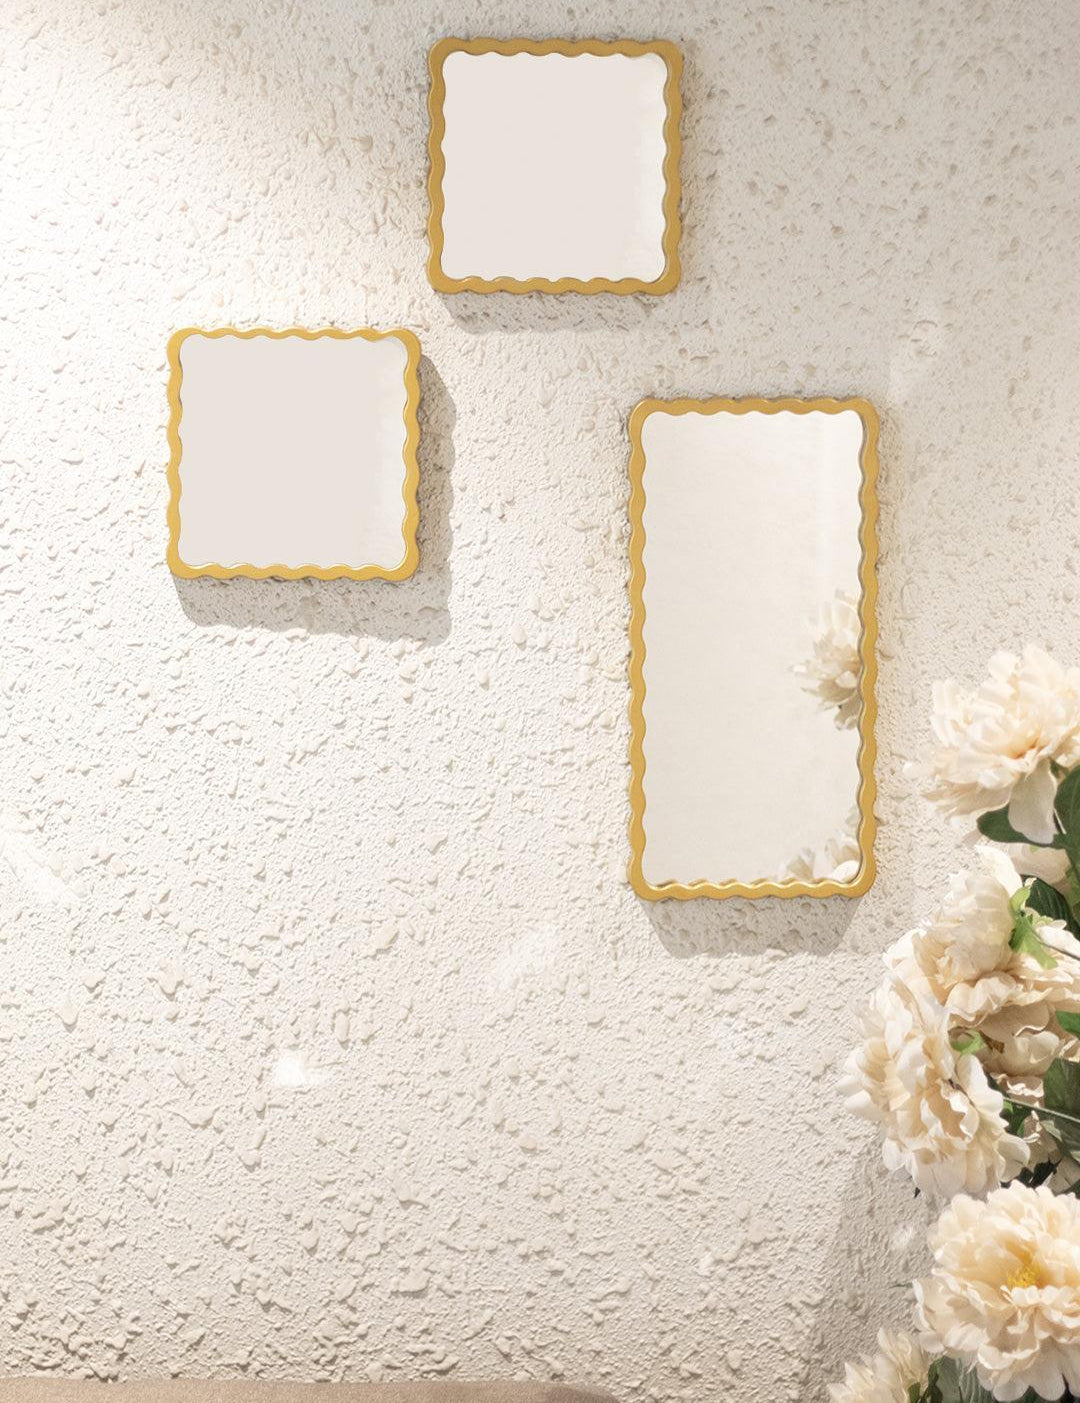 Decorative Wall Mirrors For Home Decoration (Set of 3 Mirrors) - MARKET 99